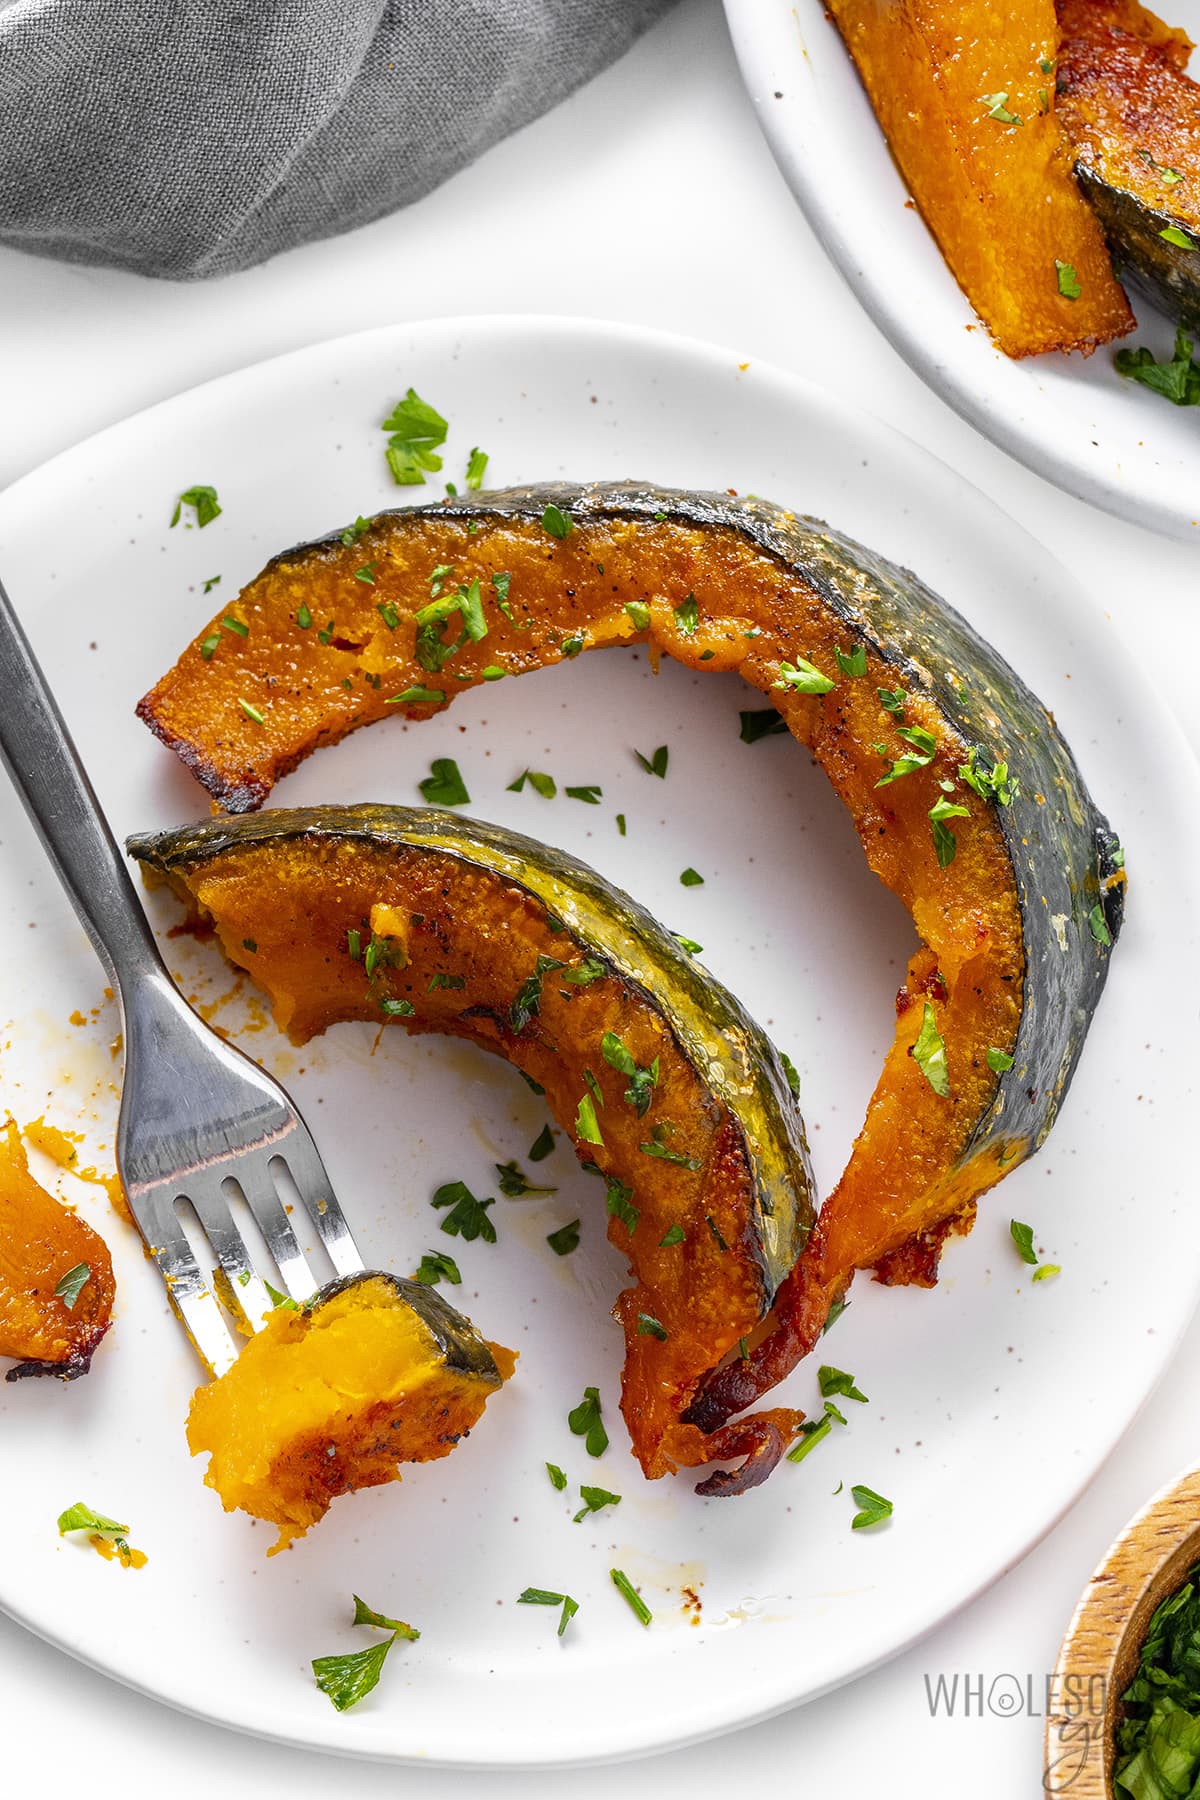 Use a fork to transfer the kabocha squash to a plate to show the texture.